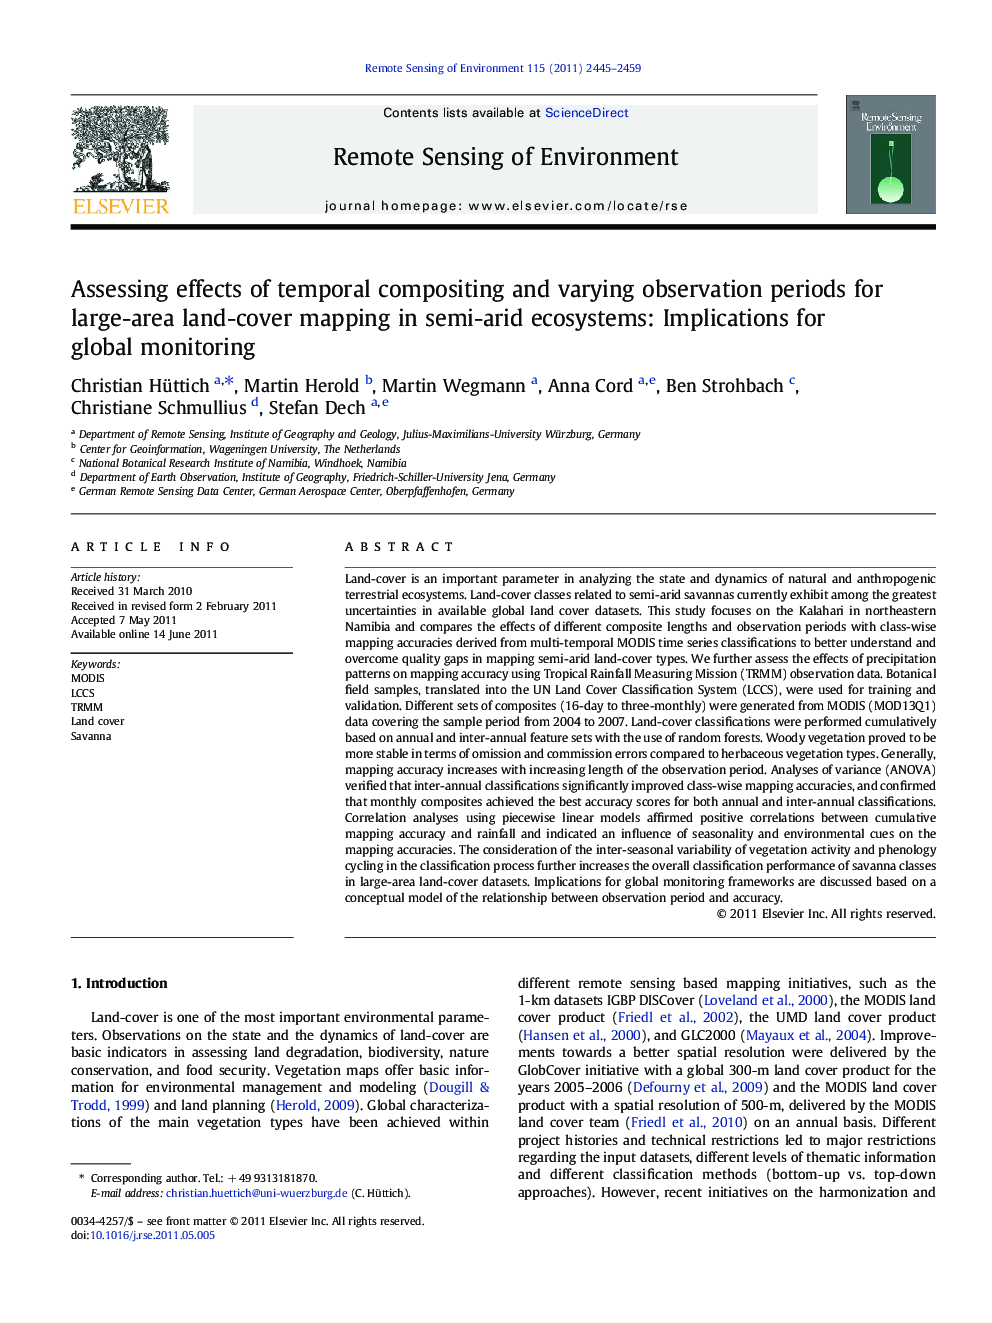 Assessing effects of temporal compositing and varying observation periods for large-area land-cover mapping in semi-arid ecosystems: Implications for global monitoring